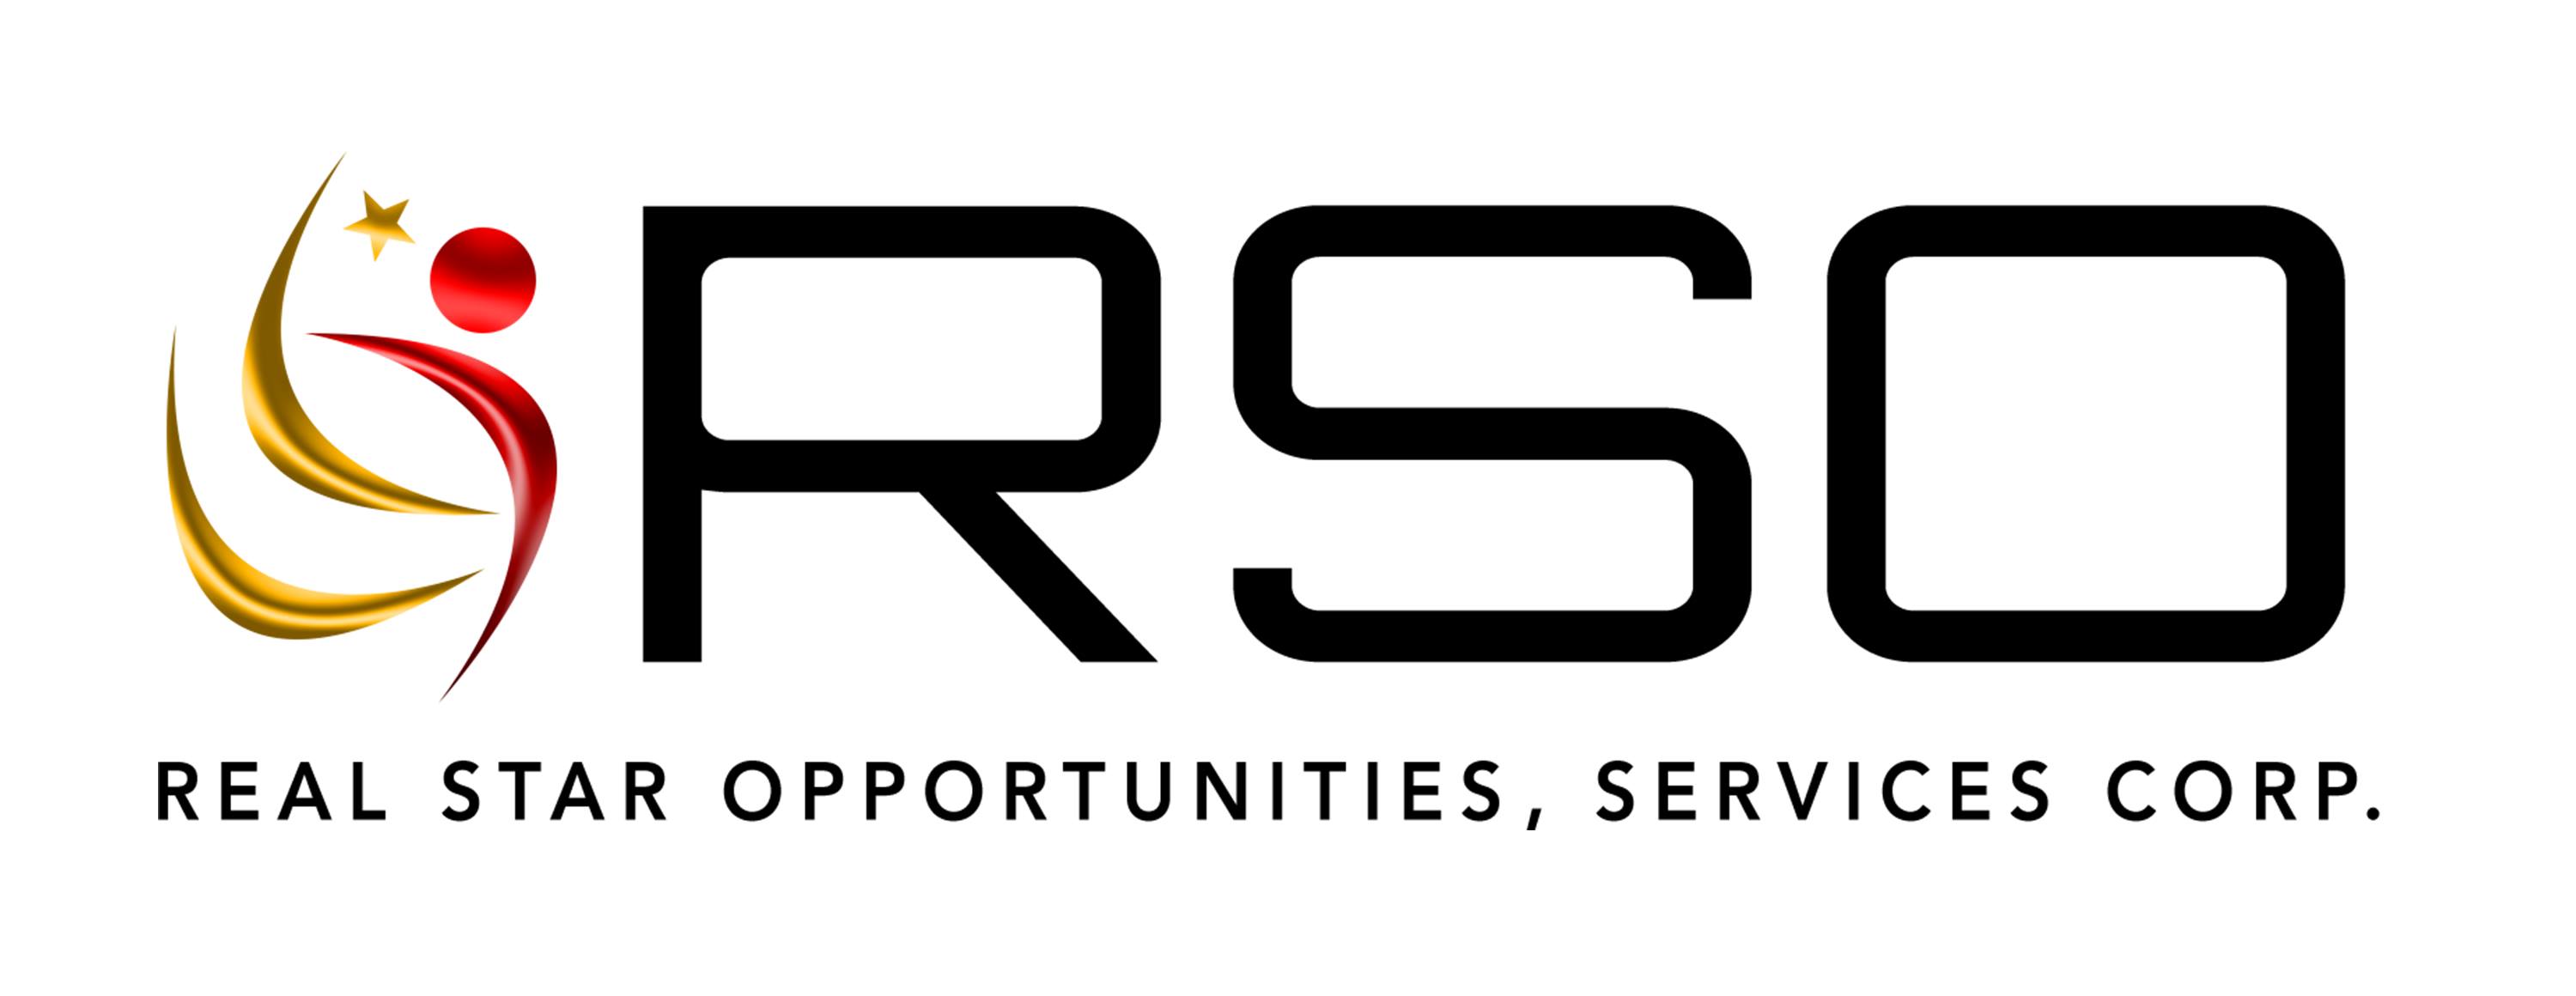 Real Star Opportunities Services Corp., RSO